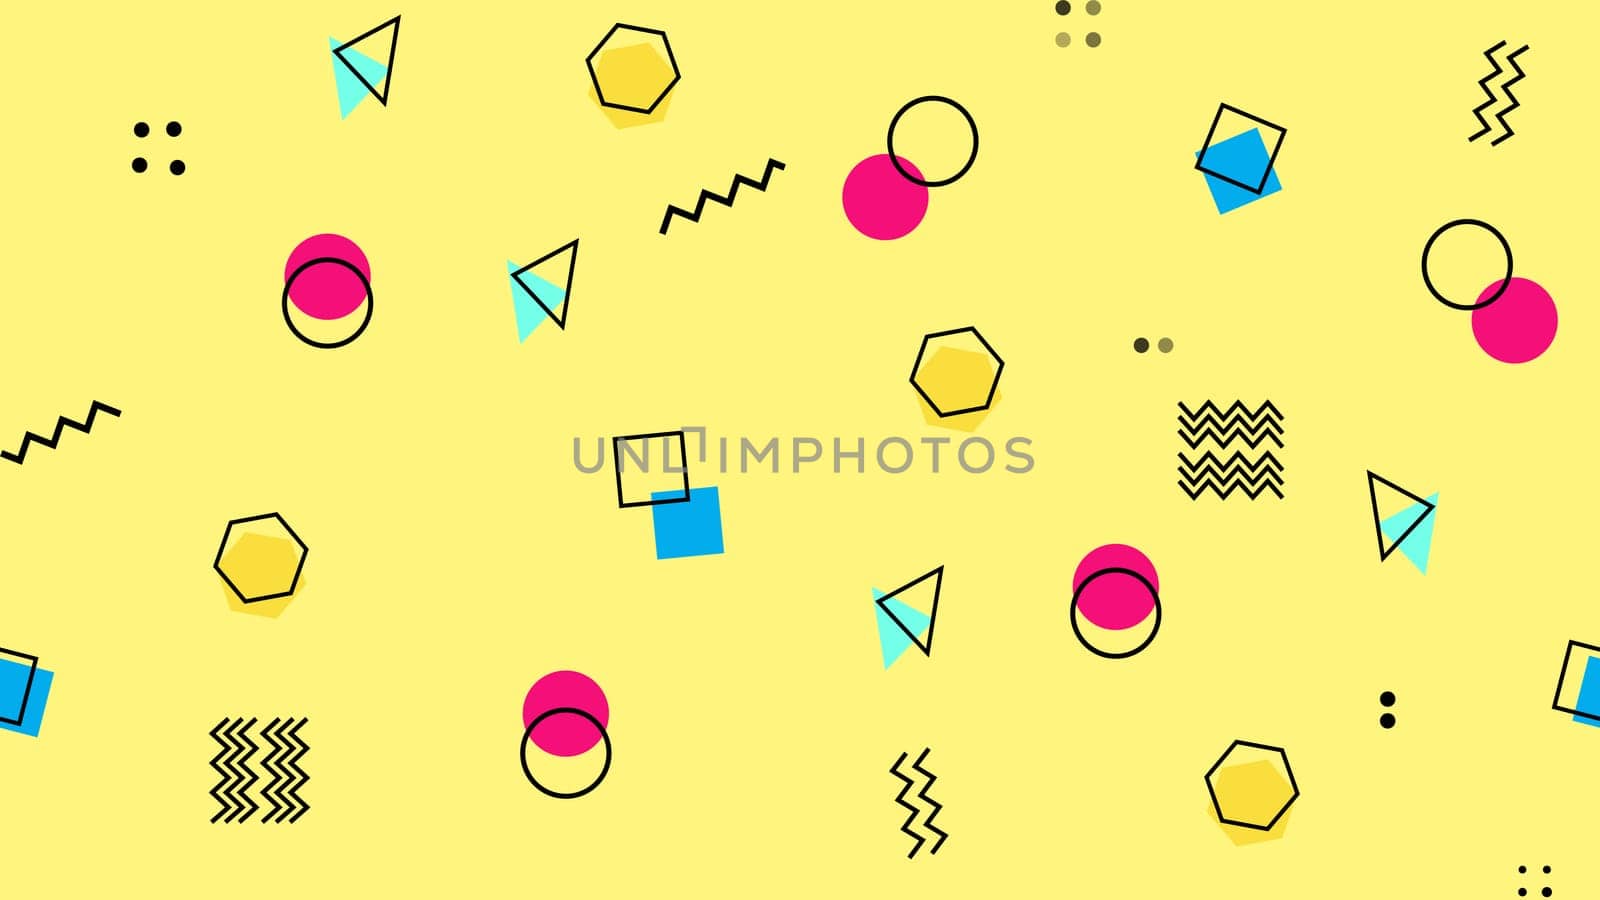 Geometric retro background pop art style with shapes on yellow composition. 80s and 90s.